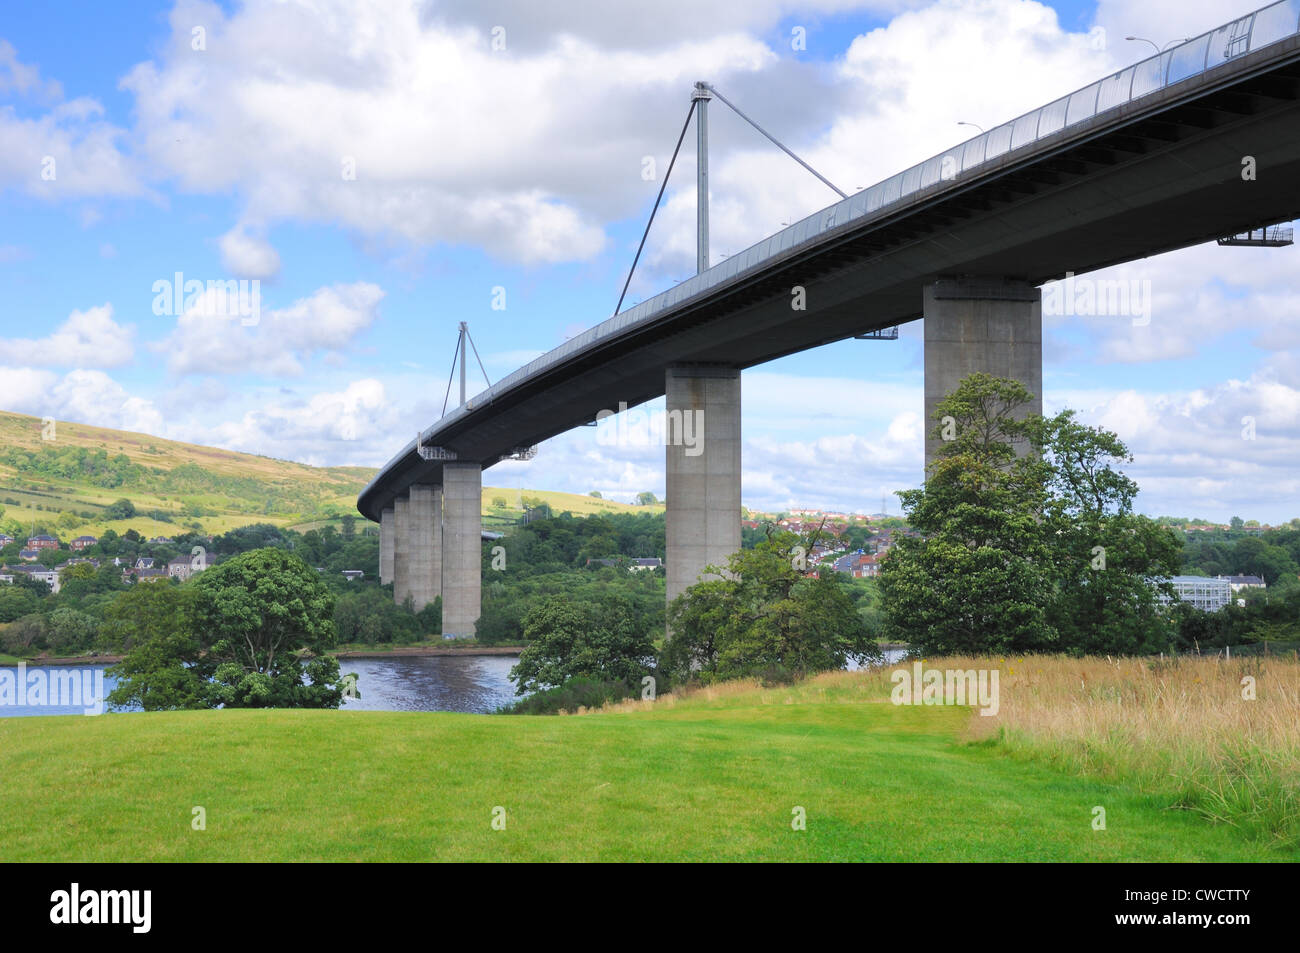 Under the Erskine Bridge, crossing the River Clyde Stock Photo